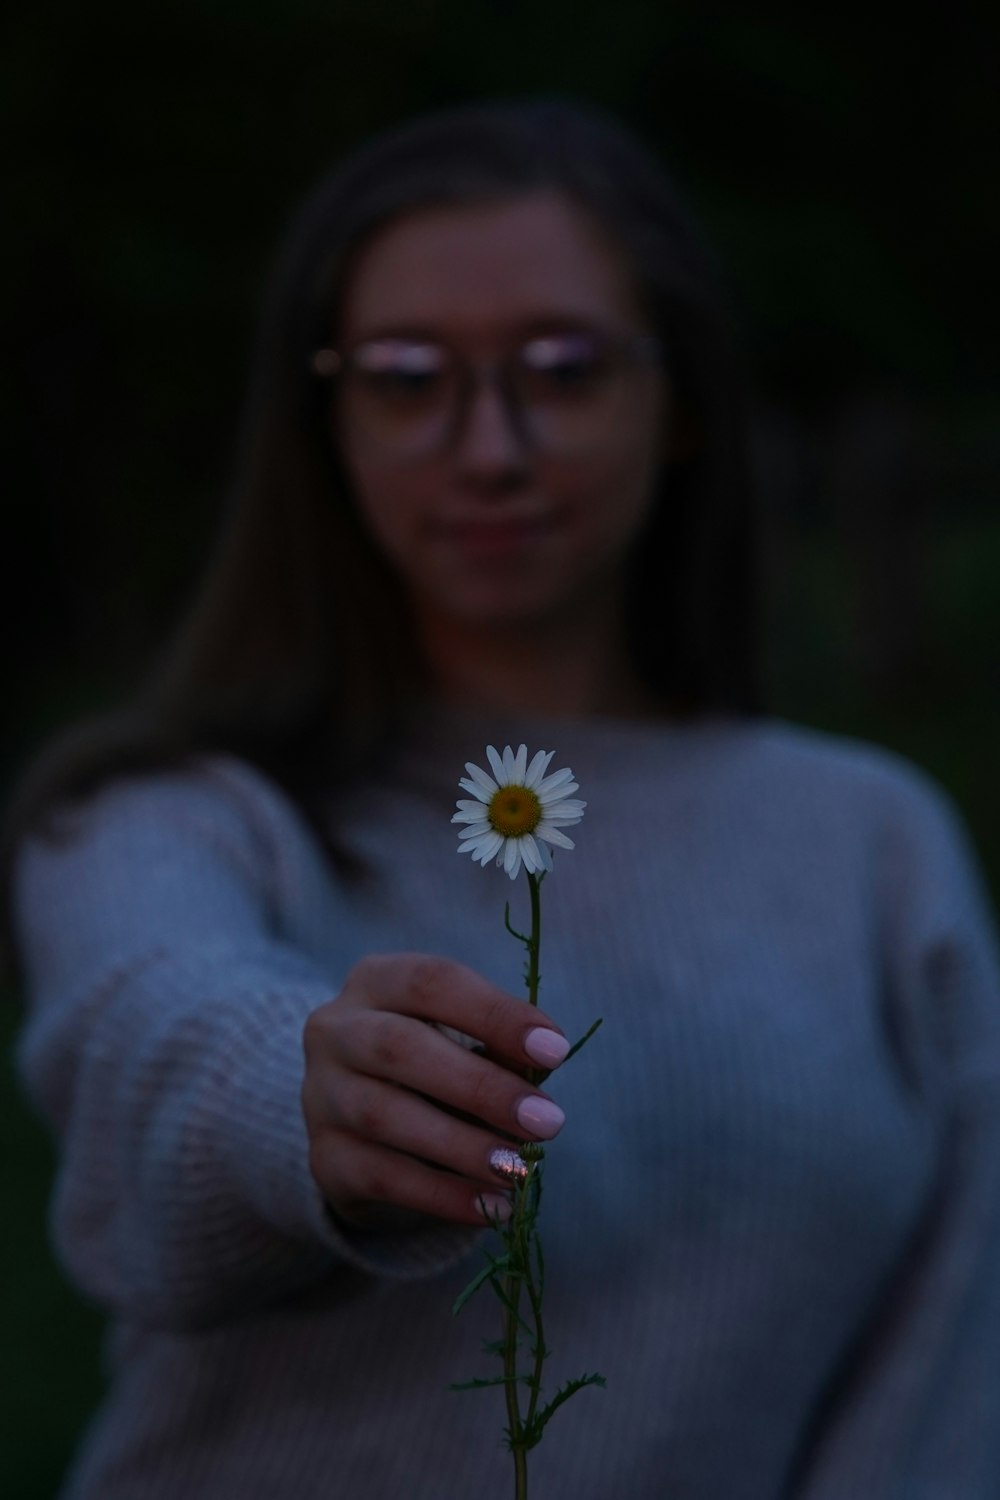 woman in gray sweater holding white daisy flower